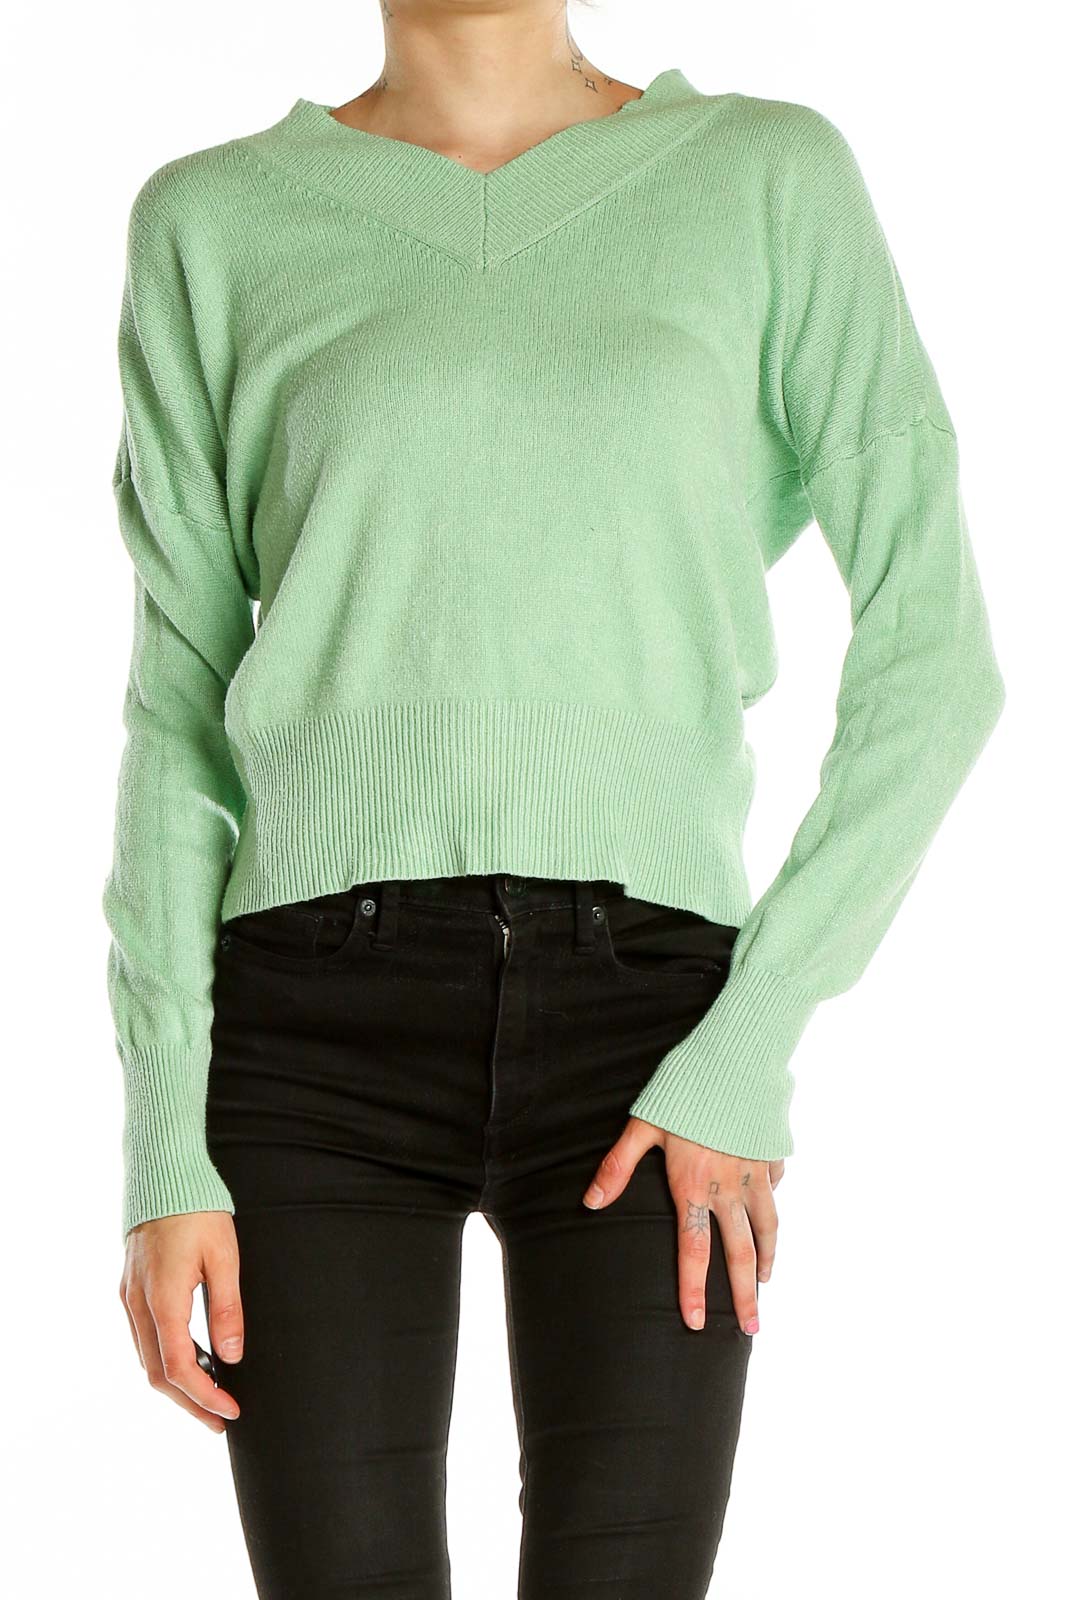 Green Sweater Front